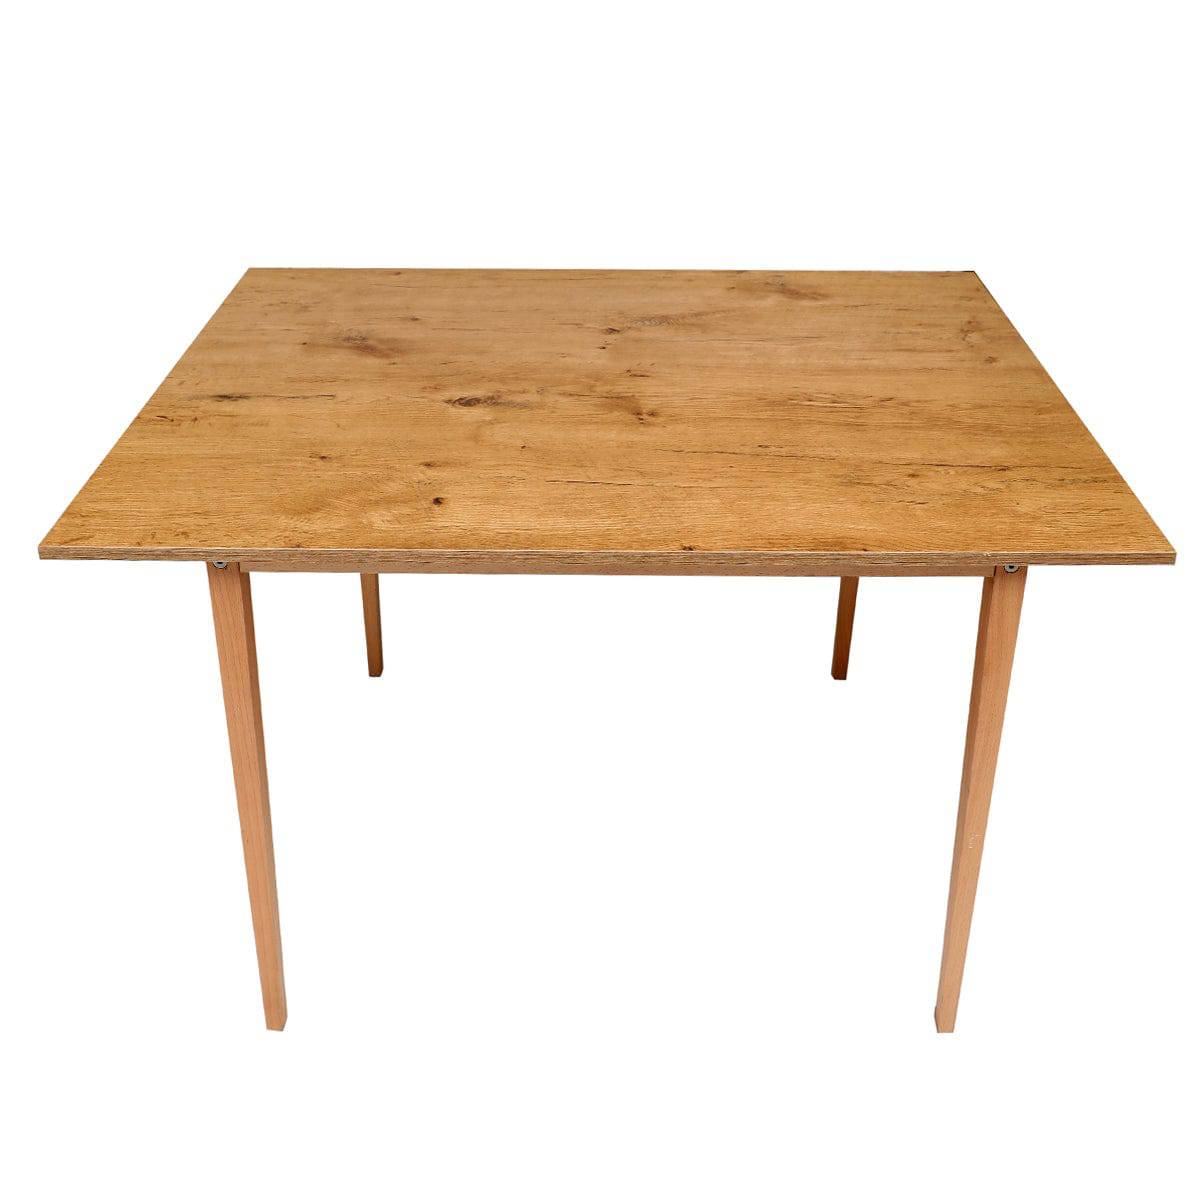 Hendrick 4 person dining table